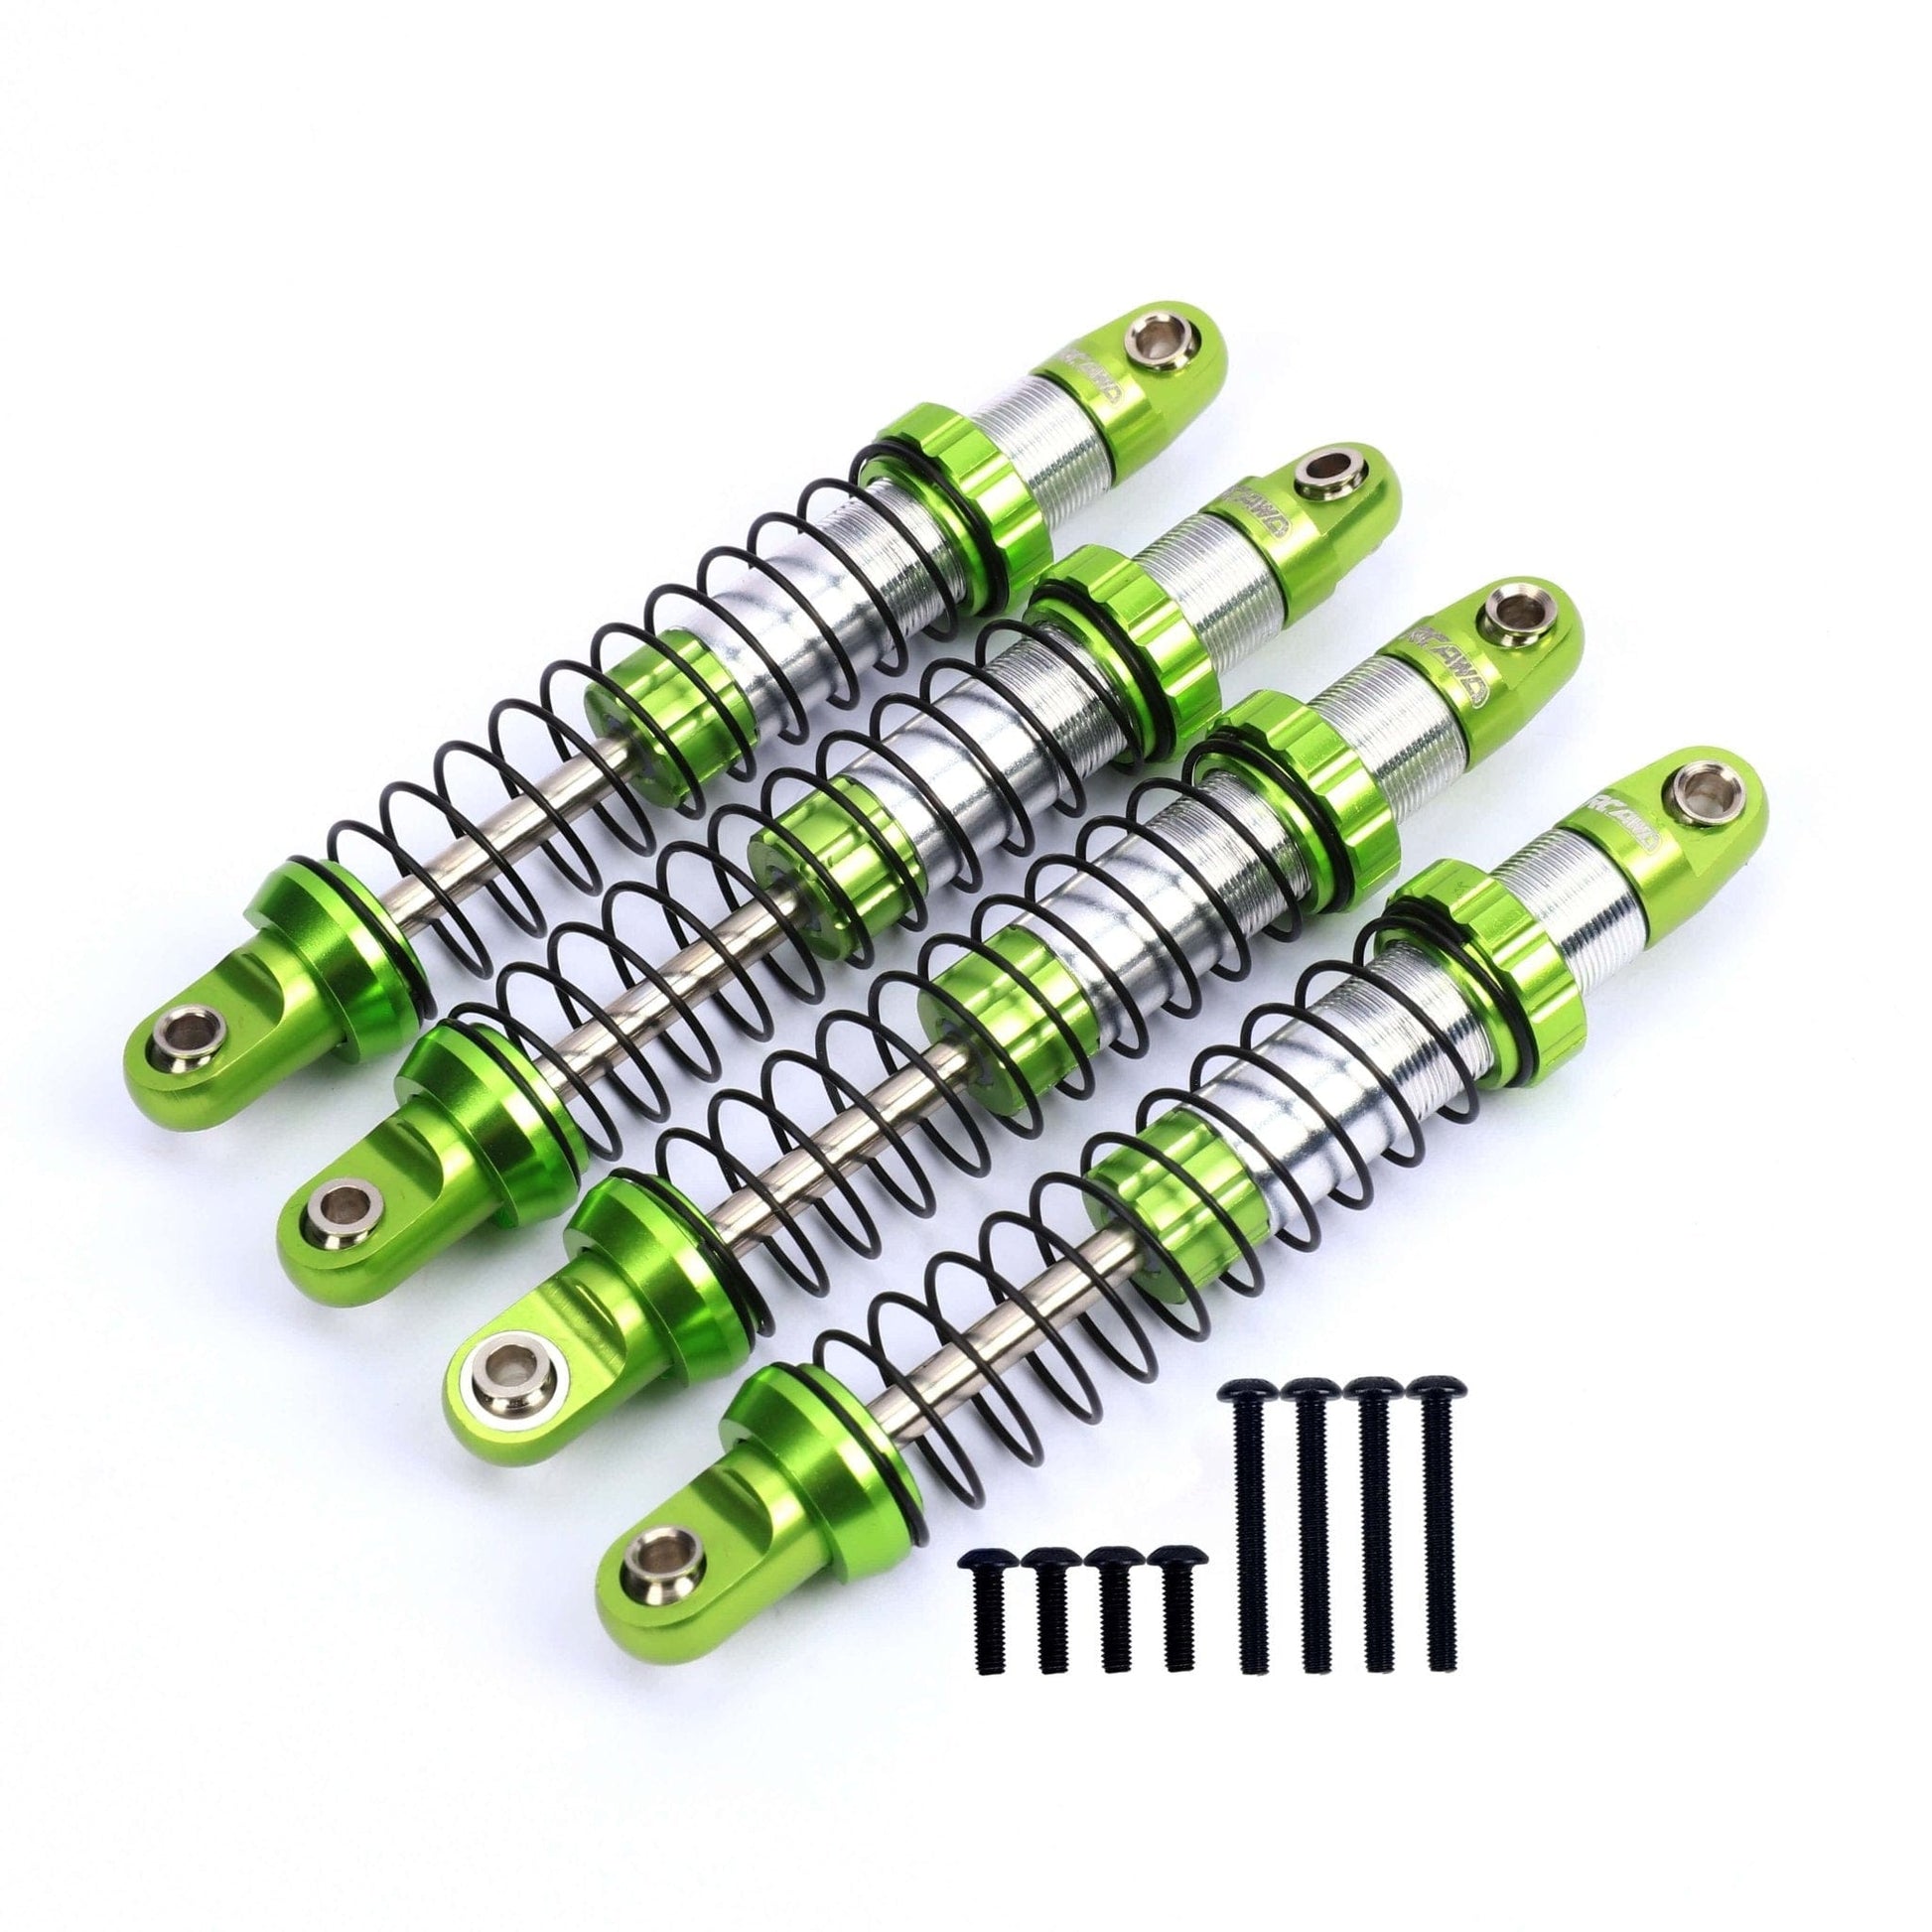 RCAWD Axial UTB18 RCAWD Axial UTB18 Capra upgrade parts shock absorber damper oil filled type 4pcs  AXI213004